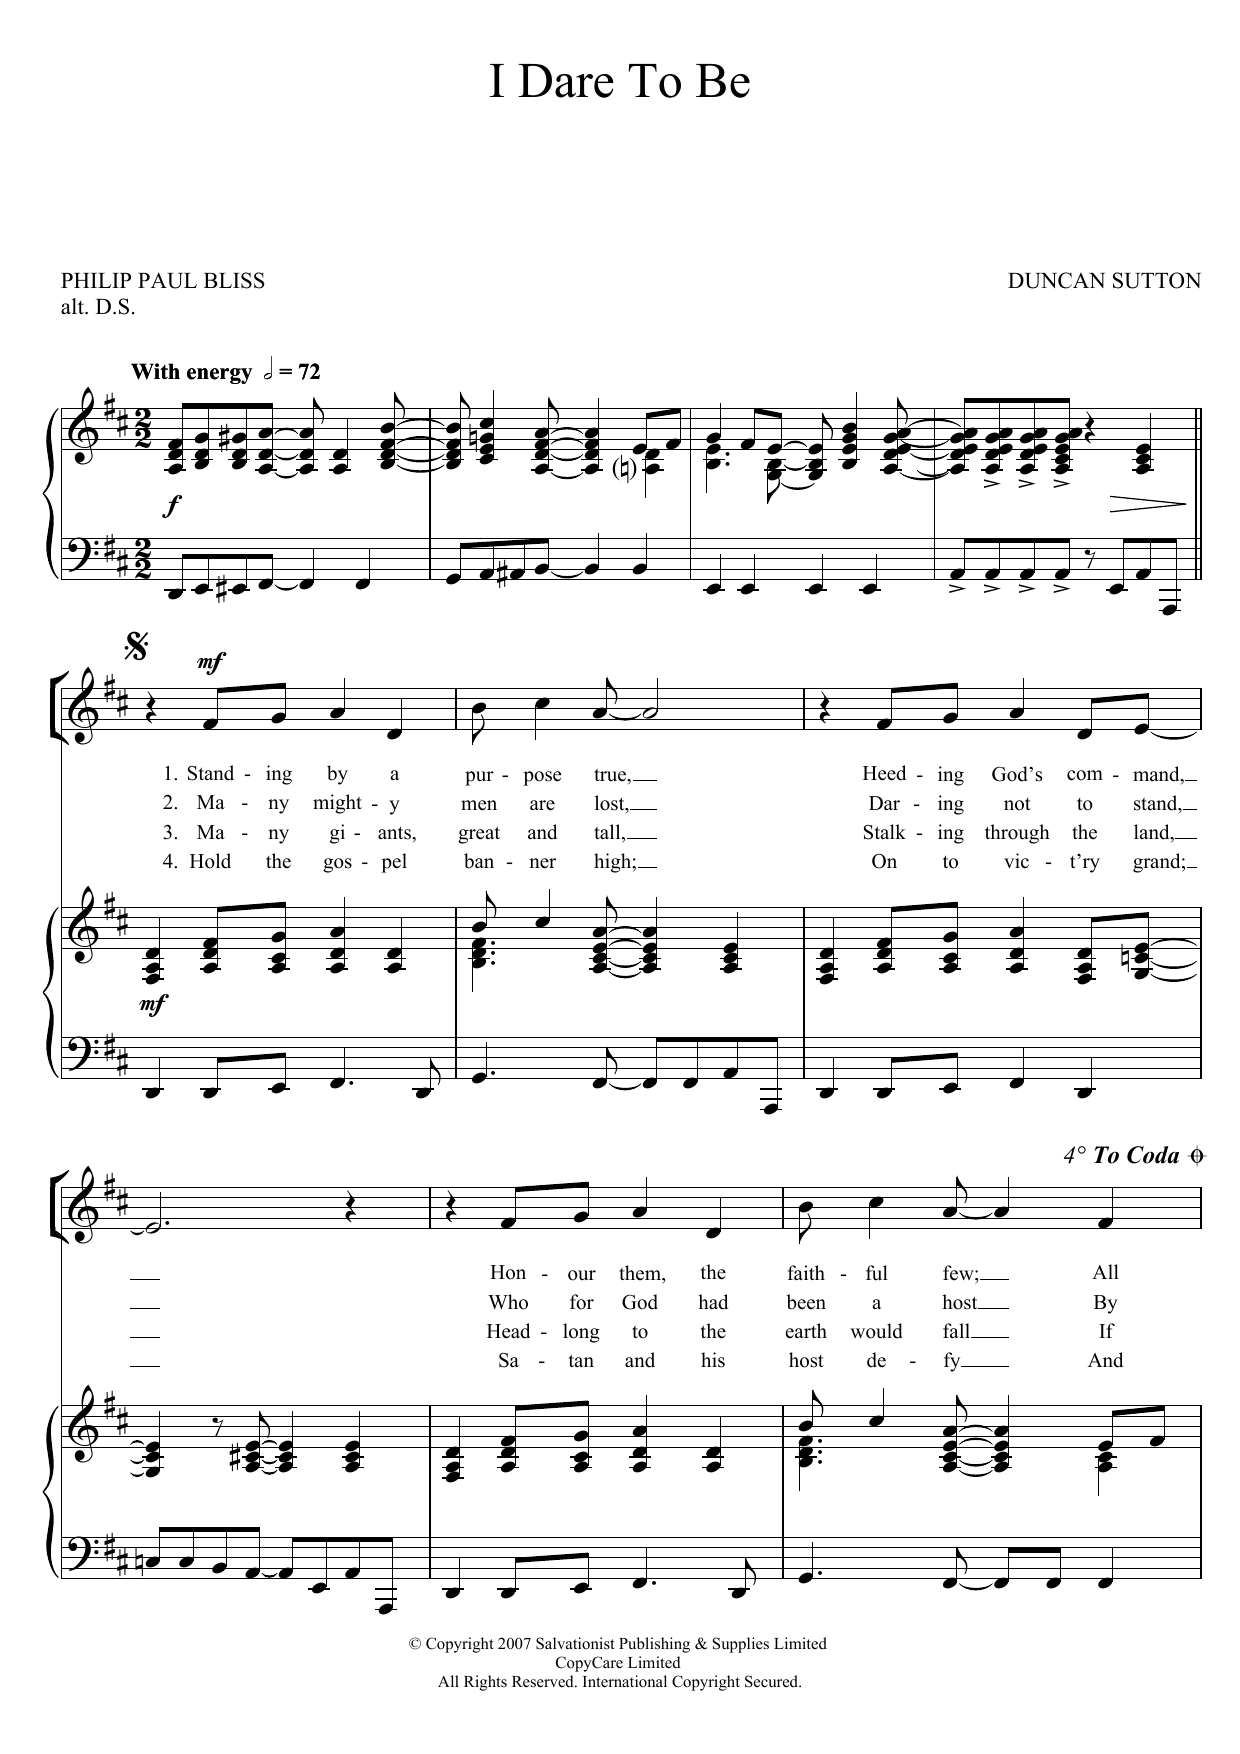 Download The Salvation Army I Dare To Be Sheet Music